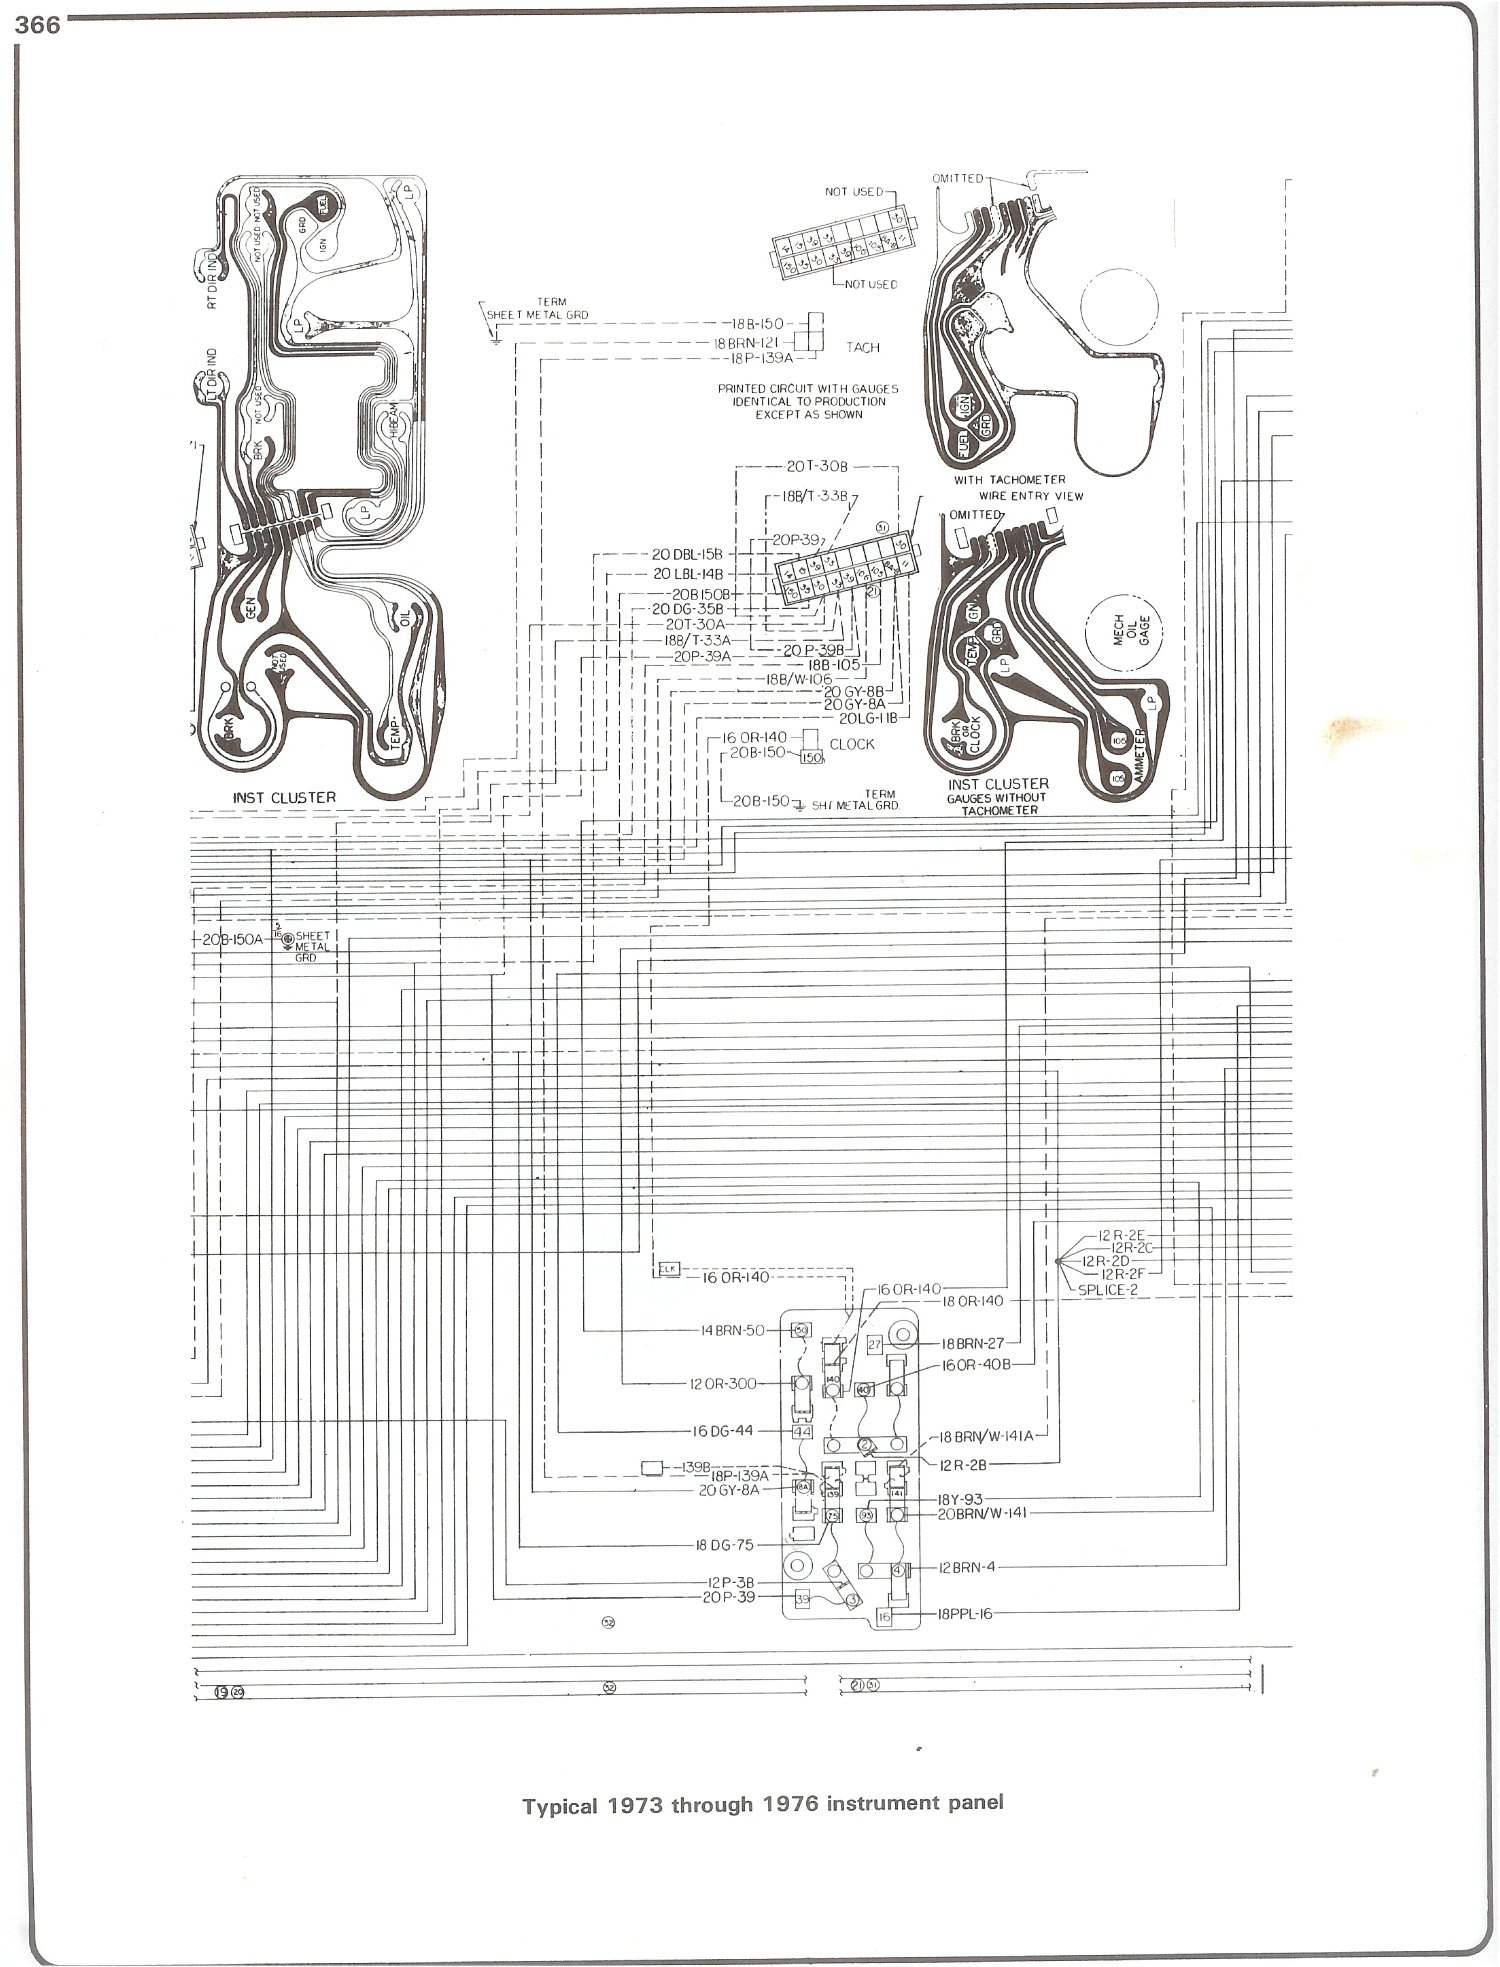 78 Chevy Truck Wiring Diagram - Wiring Diagrams Hubs - 1978 Chevy Truck Wiring Diagram